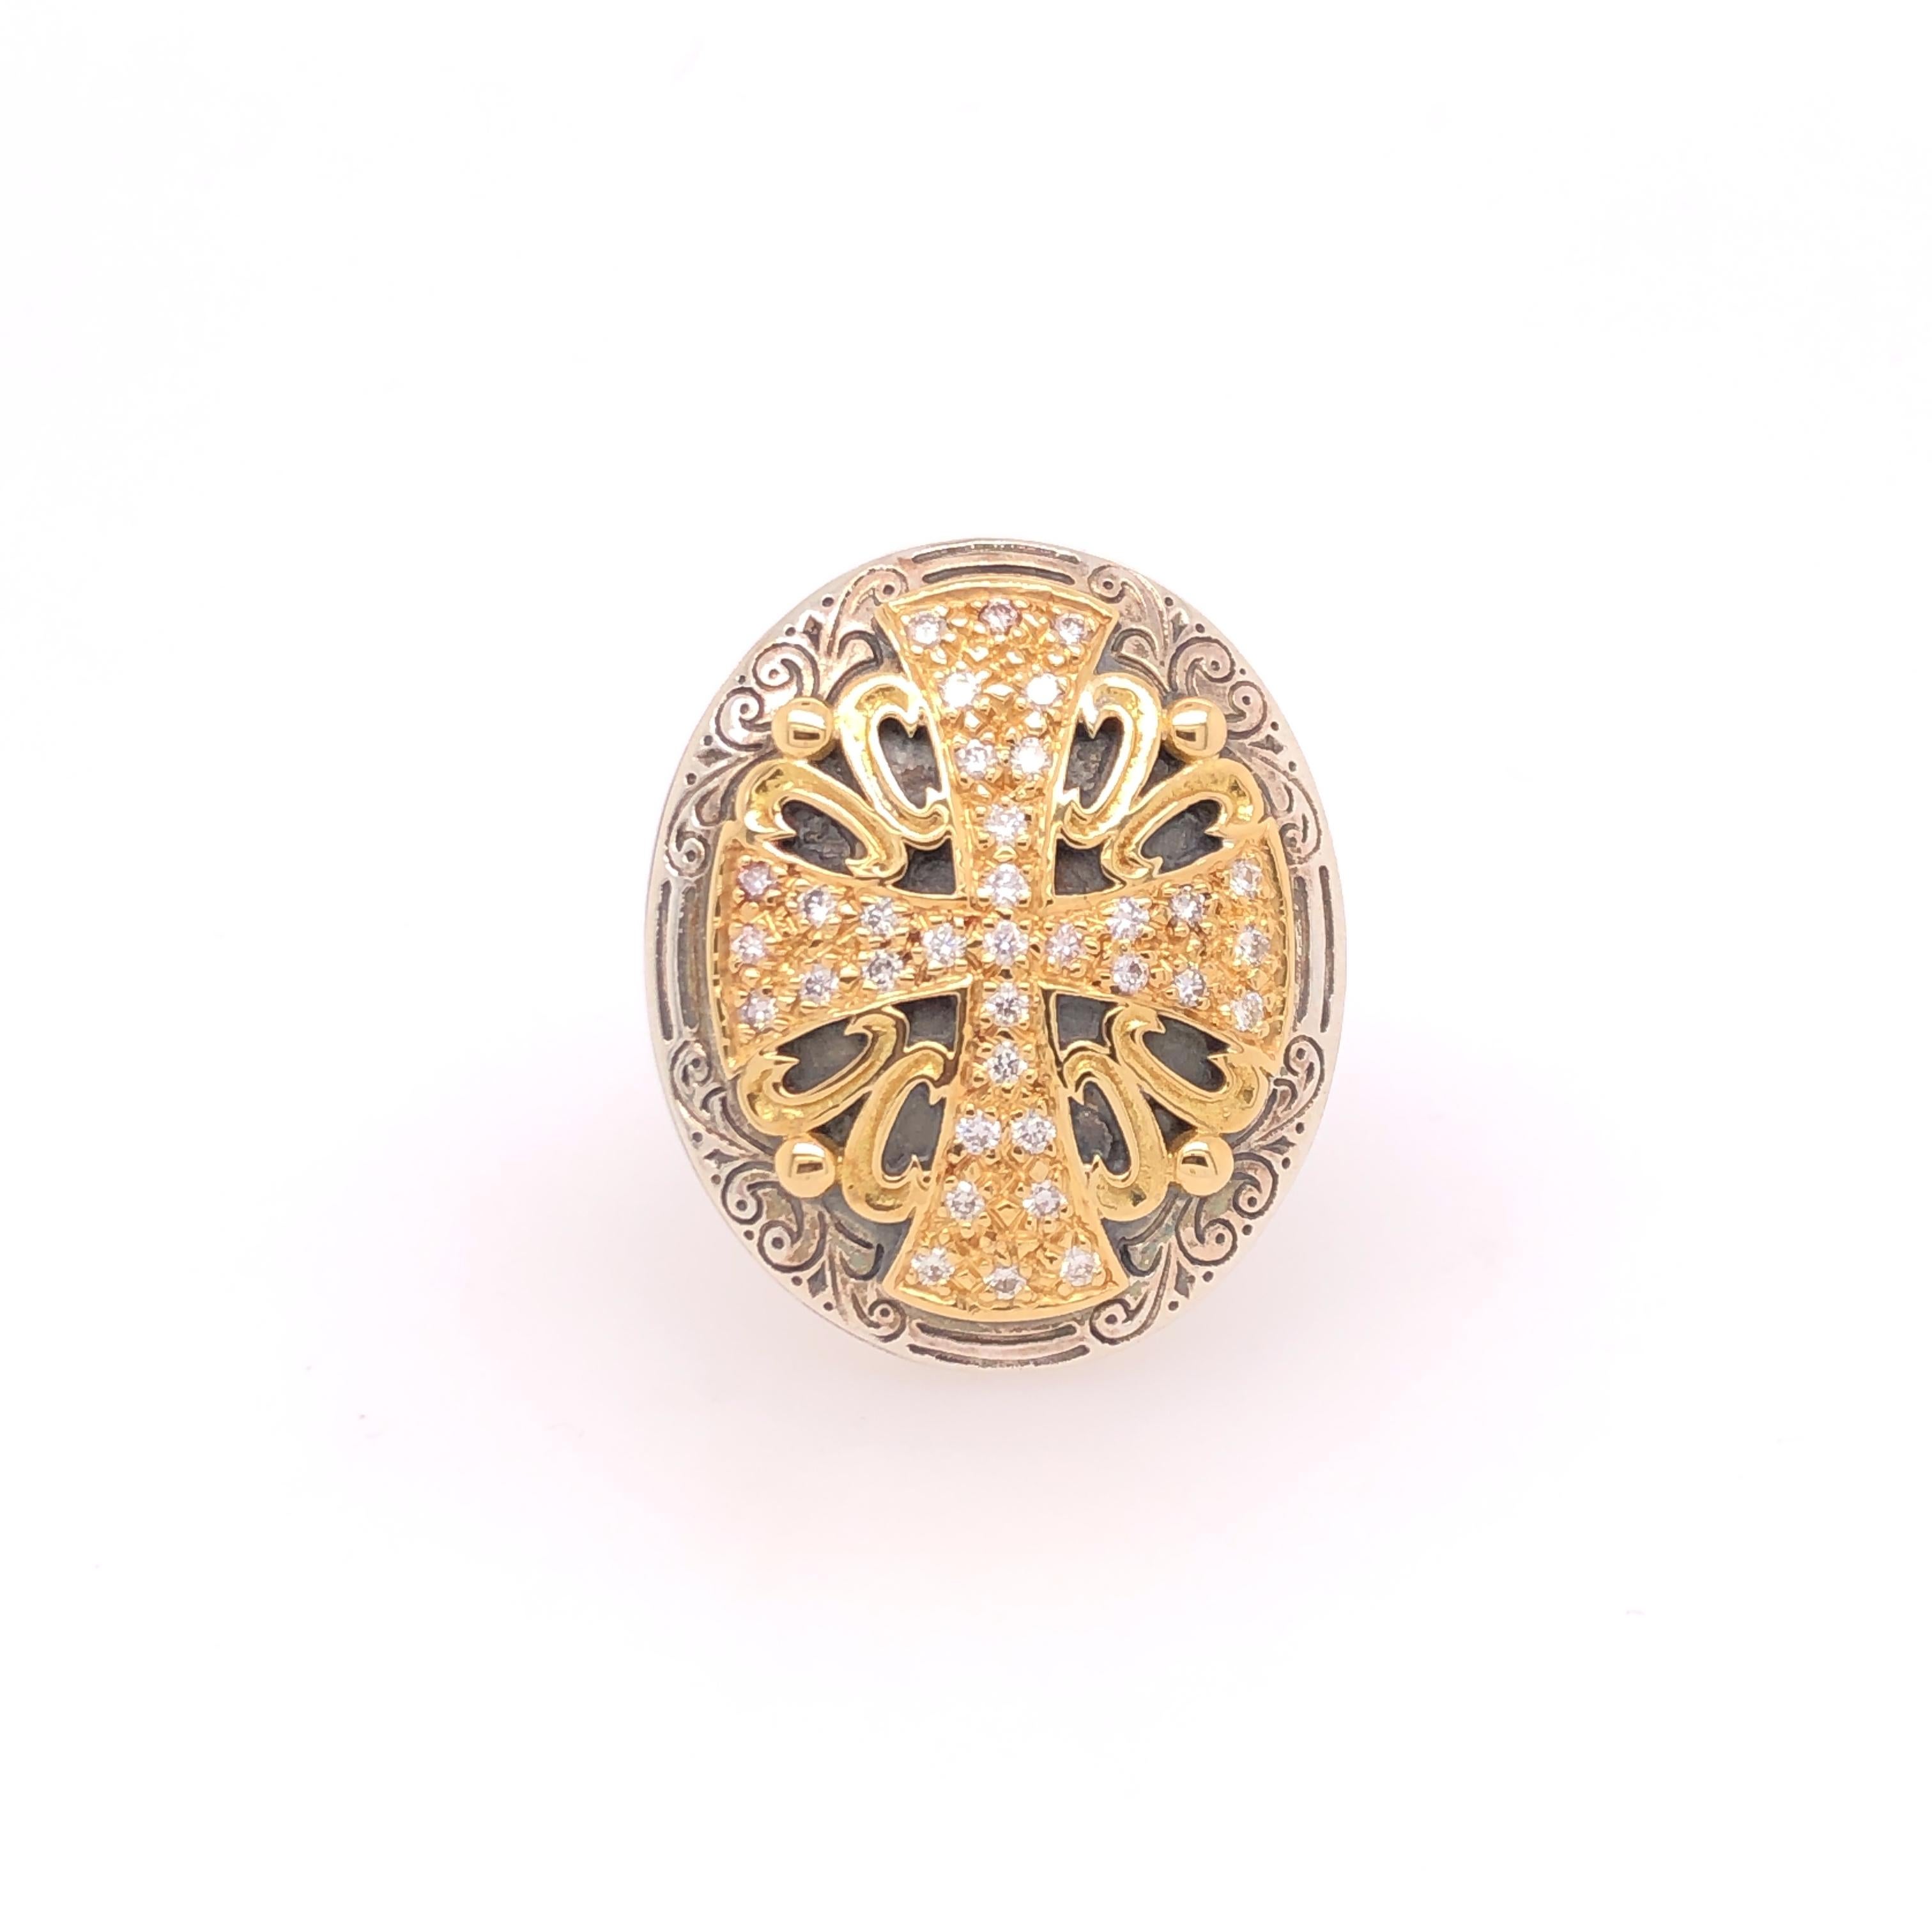 Gemstone: Diamond (0.70ct +/- ) 
Material: Sterling Silver & 18k Gold

Size: 7

Stamped: 750, 925, KONSTANTINO